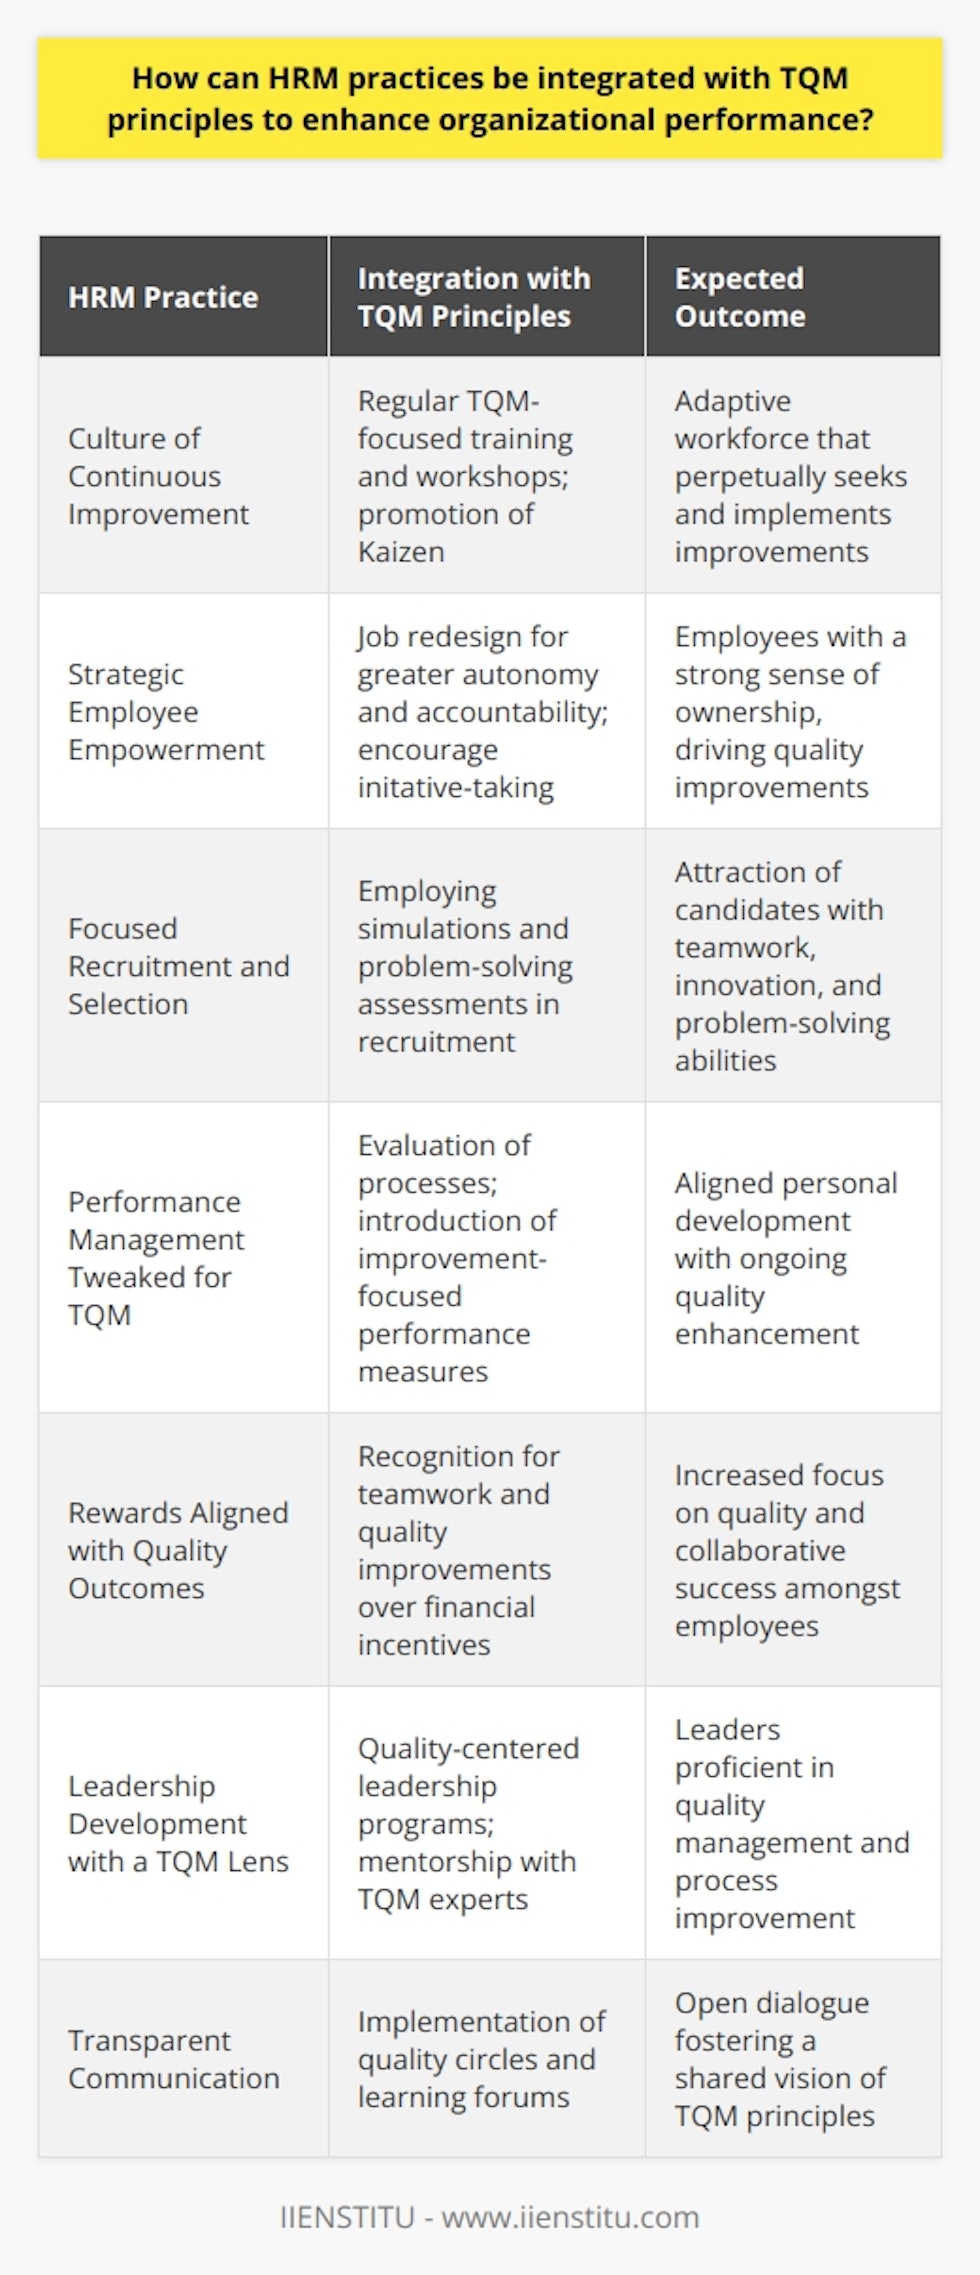 The synergy between Human Resource Management (HRM) and Total Quality Management (TQM) lays the foundation for a productive and quality-driven work environment. Utilizing HRM strategies that align with TQM principles can be the catalyst for enhanced organizational performance. Below is an exploration of how companies can weave HRM practices into the fabric of TQM to foster excellence.**Creating a Culture of Continuous Improvement**HRM is instrumental in building a culture that prioritizes continuous improvement, a core tenet of TQM. This involves the cultivation of a workforce that is not just responsive to change, but actively seeks it. Human resources can conduct regular training programs, workshops, and seminars that are less known in generic practices but tailored to embed TQM values, such as Kaizen, which focuses on consistent, incremental improvements.**Strategic Employee Empowerment**Empowerment is a hallmark of TQM, and HRM catalyzes this by developing roles that provide employees with greater autonomy and accountability. Jobs could be redesigned to allow for decision-making at the level closest to the problem or task, fostering a sense of ownership among employees. By encouraging initiative-taking, HRM practices can ignite a proactive stance in workers to maintain high quality in their respective areas.**Focused Recruitment and Selection**The integration process also encompasses the recruitment phase. Unlike conventional recruitment processes, an HR strategy aligned with TQM principles will look for candidates with a proclivity for teamwork, innovation, and problem-solving. However, rather than relying on the standard interview techniques, HR could deploy simulations and problem-solving scenarios to better identify individuals who naturally operate within a TQM framework.**Performance Management Tweaked for TQM**Performance management systems informed by TQM principles are not solely focused on end results but also evaluate the processes employed to achieve those results. Unlike many performance systems, HR could introduce measures that evaluate how improvements are identified, planned, and executed, therefore reinforcing the TQM methodology. Constructive feedback processes would then serve dual purposes: personal development and quality enhancement.**Rewards Aligned with Quality Outcomes**Rewards and recognition systems, when integrated with TQM, shift away from traditional financial incentives to recognitions that underscore quality and teamwork. Innovative recognition practices could include peer-nominated awards for quality improvements or recognizing teams that excel in cross-functional collaborations - practices that are rarely visible in standard reward systems.**Leadership Development with a TQM Lens**Leadership within an organization is pivotal in espousing TQM principles, and HRM can play a critical role in shaping these leaders. Leadership development programs would be uniquely structured to stress quality management and process improvement as key leadership competencies. HR could facilitate mentoring programs that pair emerging leaders with TQM-savvy executives, providing real-world learning experiences beyond conventional training modules.**Transparent Communication**An often underestimated HRM practice is the creation of communication channels that reflect TQM values. Unique strategies such as quality circles or learning forums could be instituted to discuss best practices, process improvements, and customer feedback, creating a dialogue that resonates with TQM ideology.In essence, the melding of HRM practices with TQM principles represents a strategic alignment that promotes a high-performance culture focused on quality. It's a potent combination that spurs organizational growth, innovation, and a durable competitive advantage in the market. Through targeted training and development, strategic employee empowerment, selective recruitment, nuanced performance management, rewards linked to quality, leadership development, and transparent communication, organizations can actualize a workforce that is both quality-conscious and highly effective, setting a benchmark that fosters long-term success.